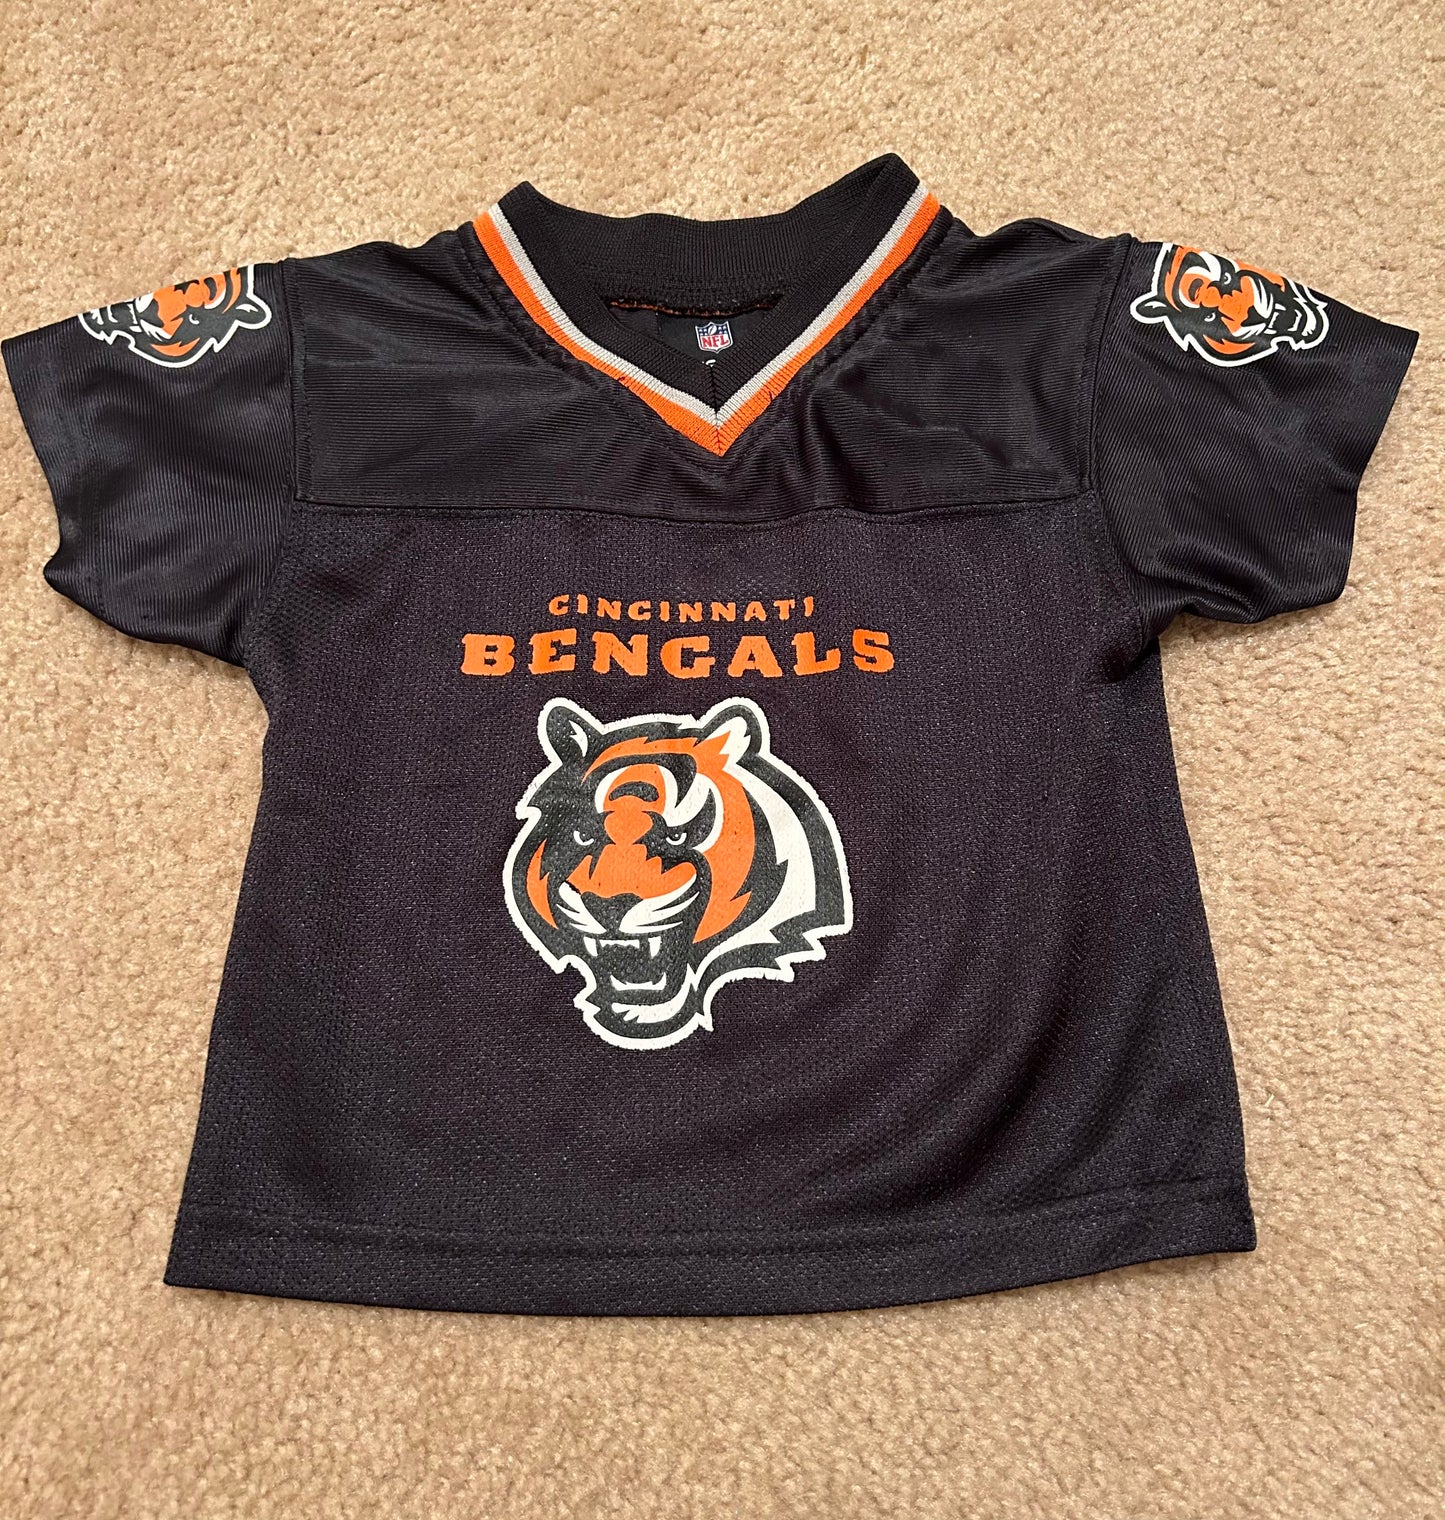 Reebok 2t Generic Bengals Jersey (see pics for back)